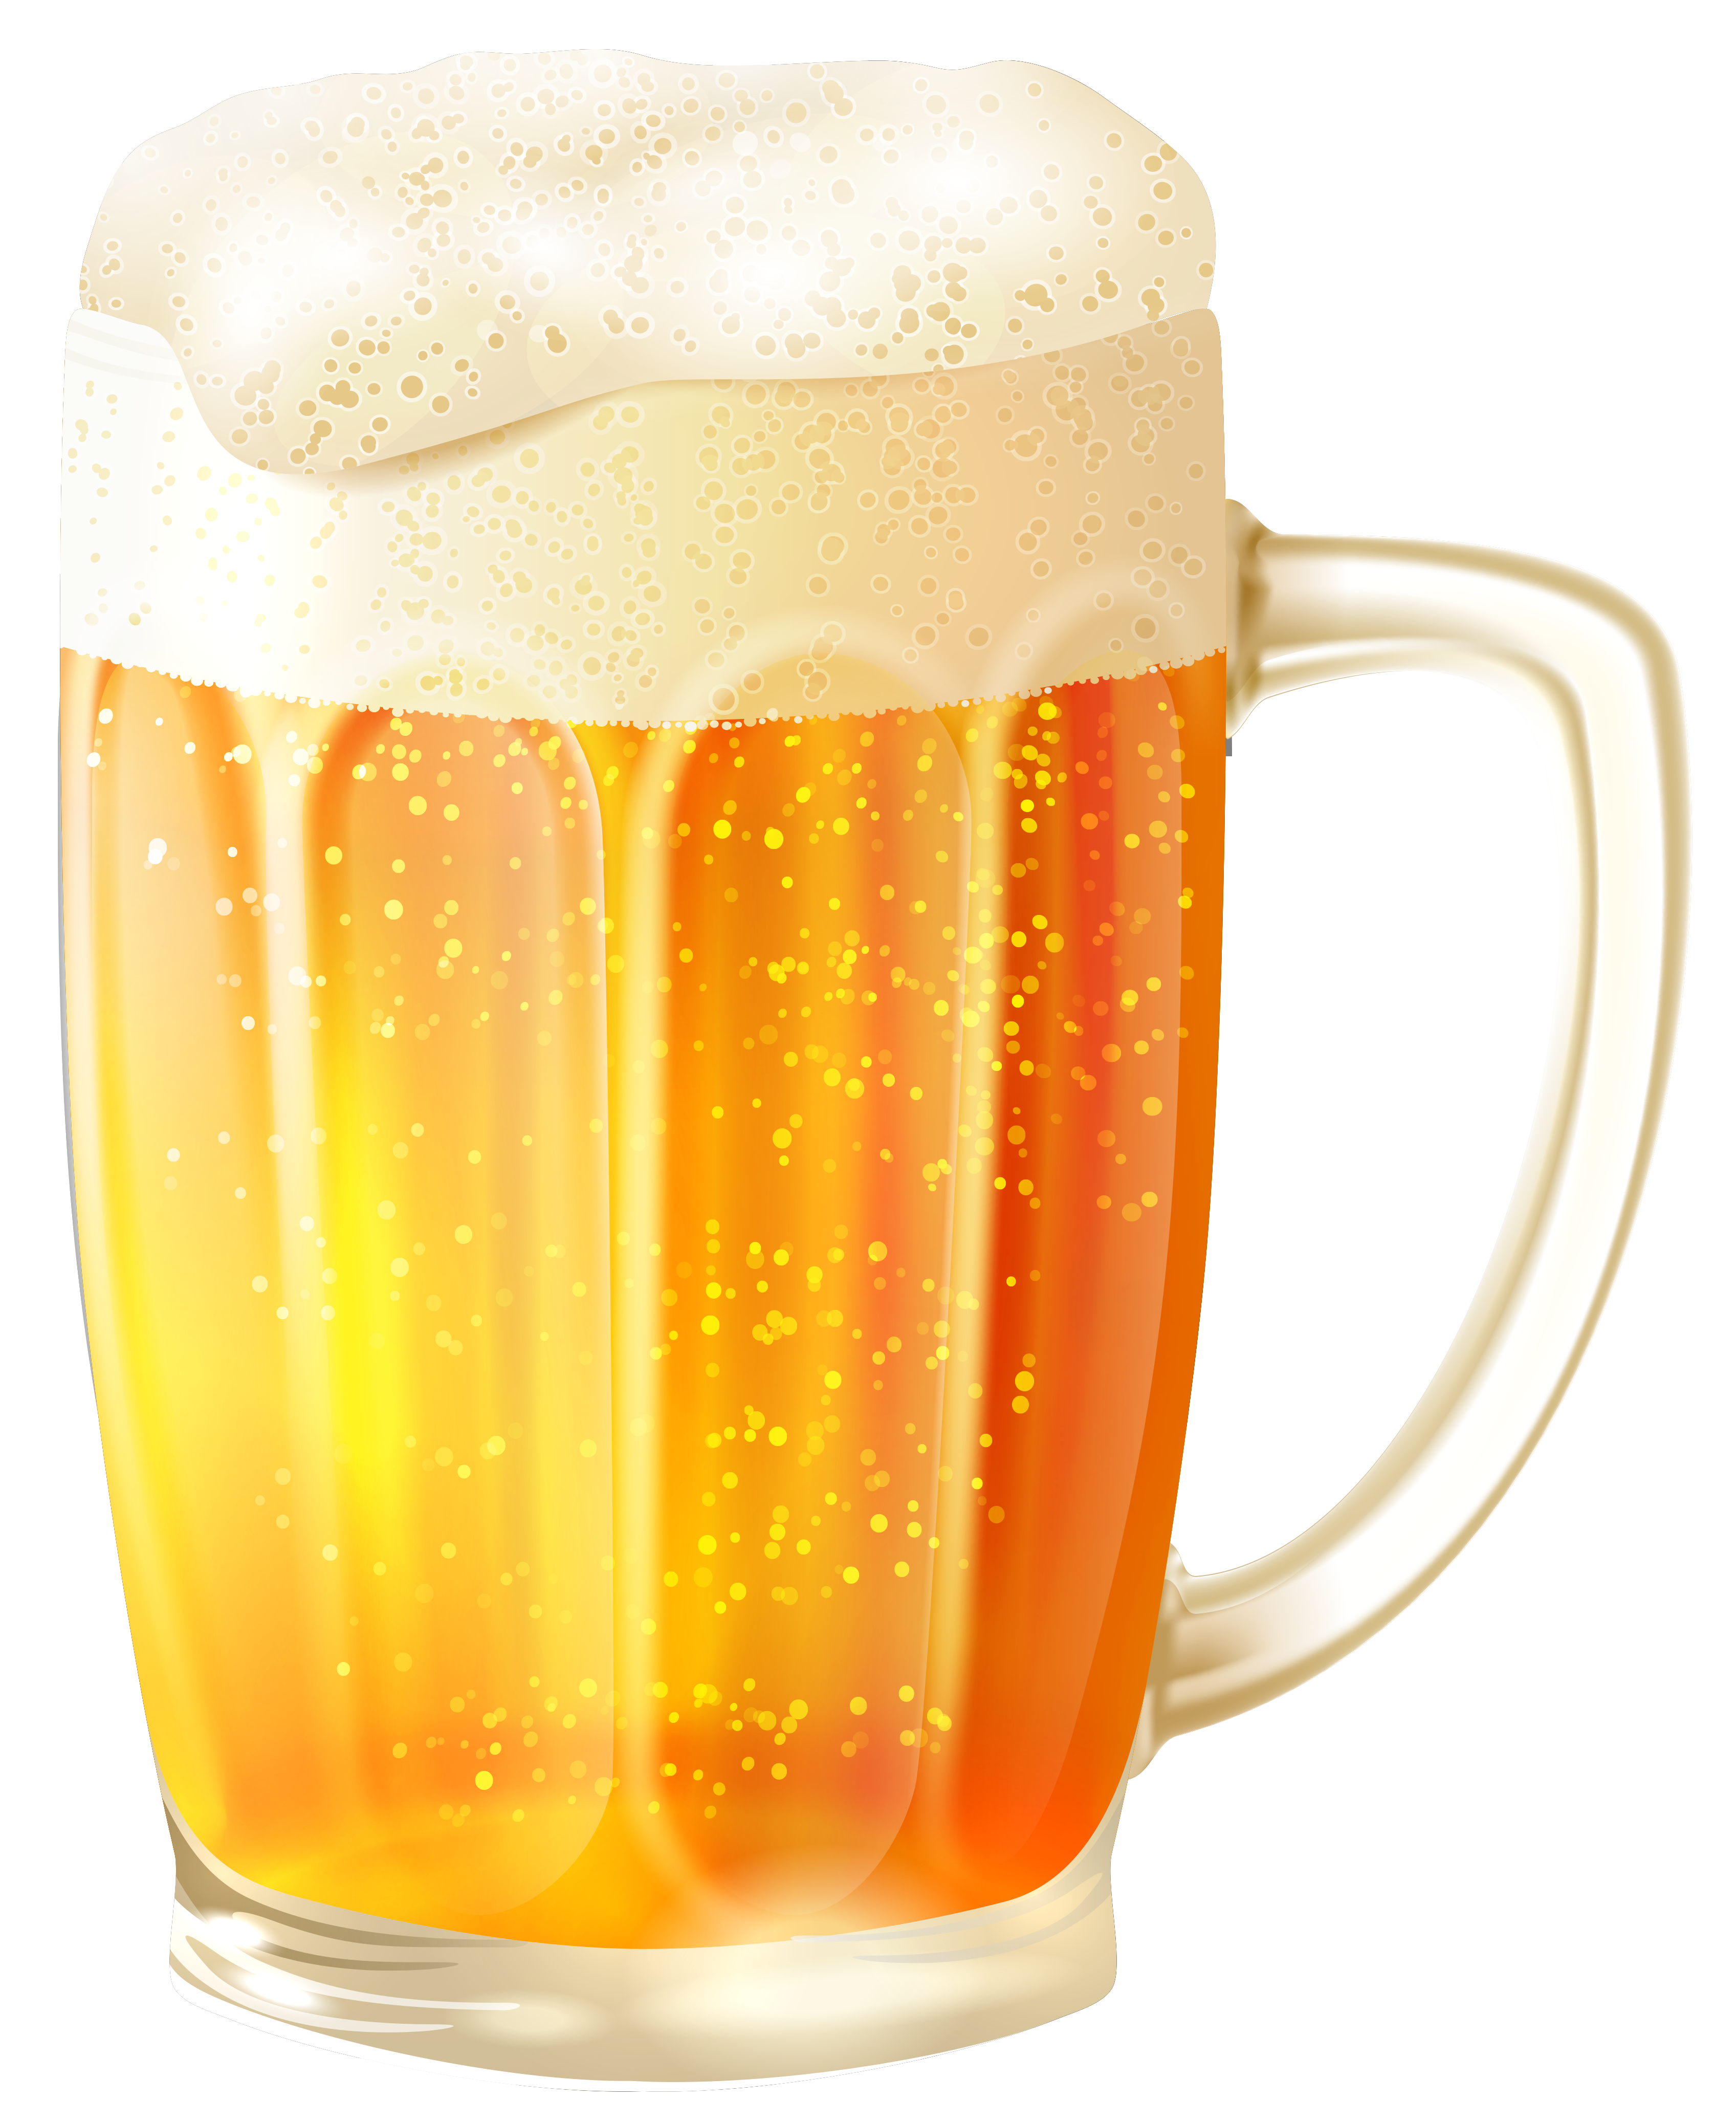 Clipart cup translucent. Mug with beer png